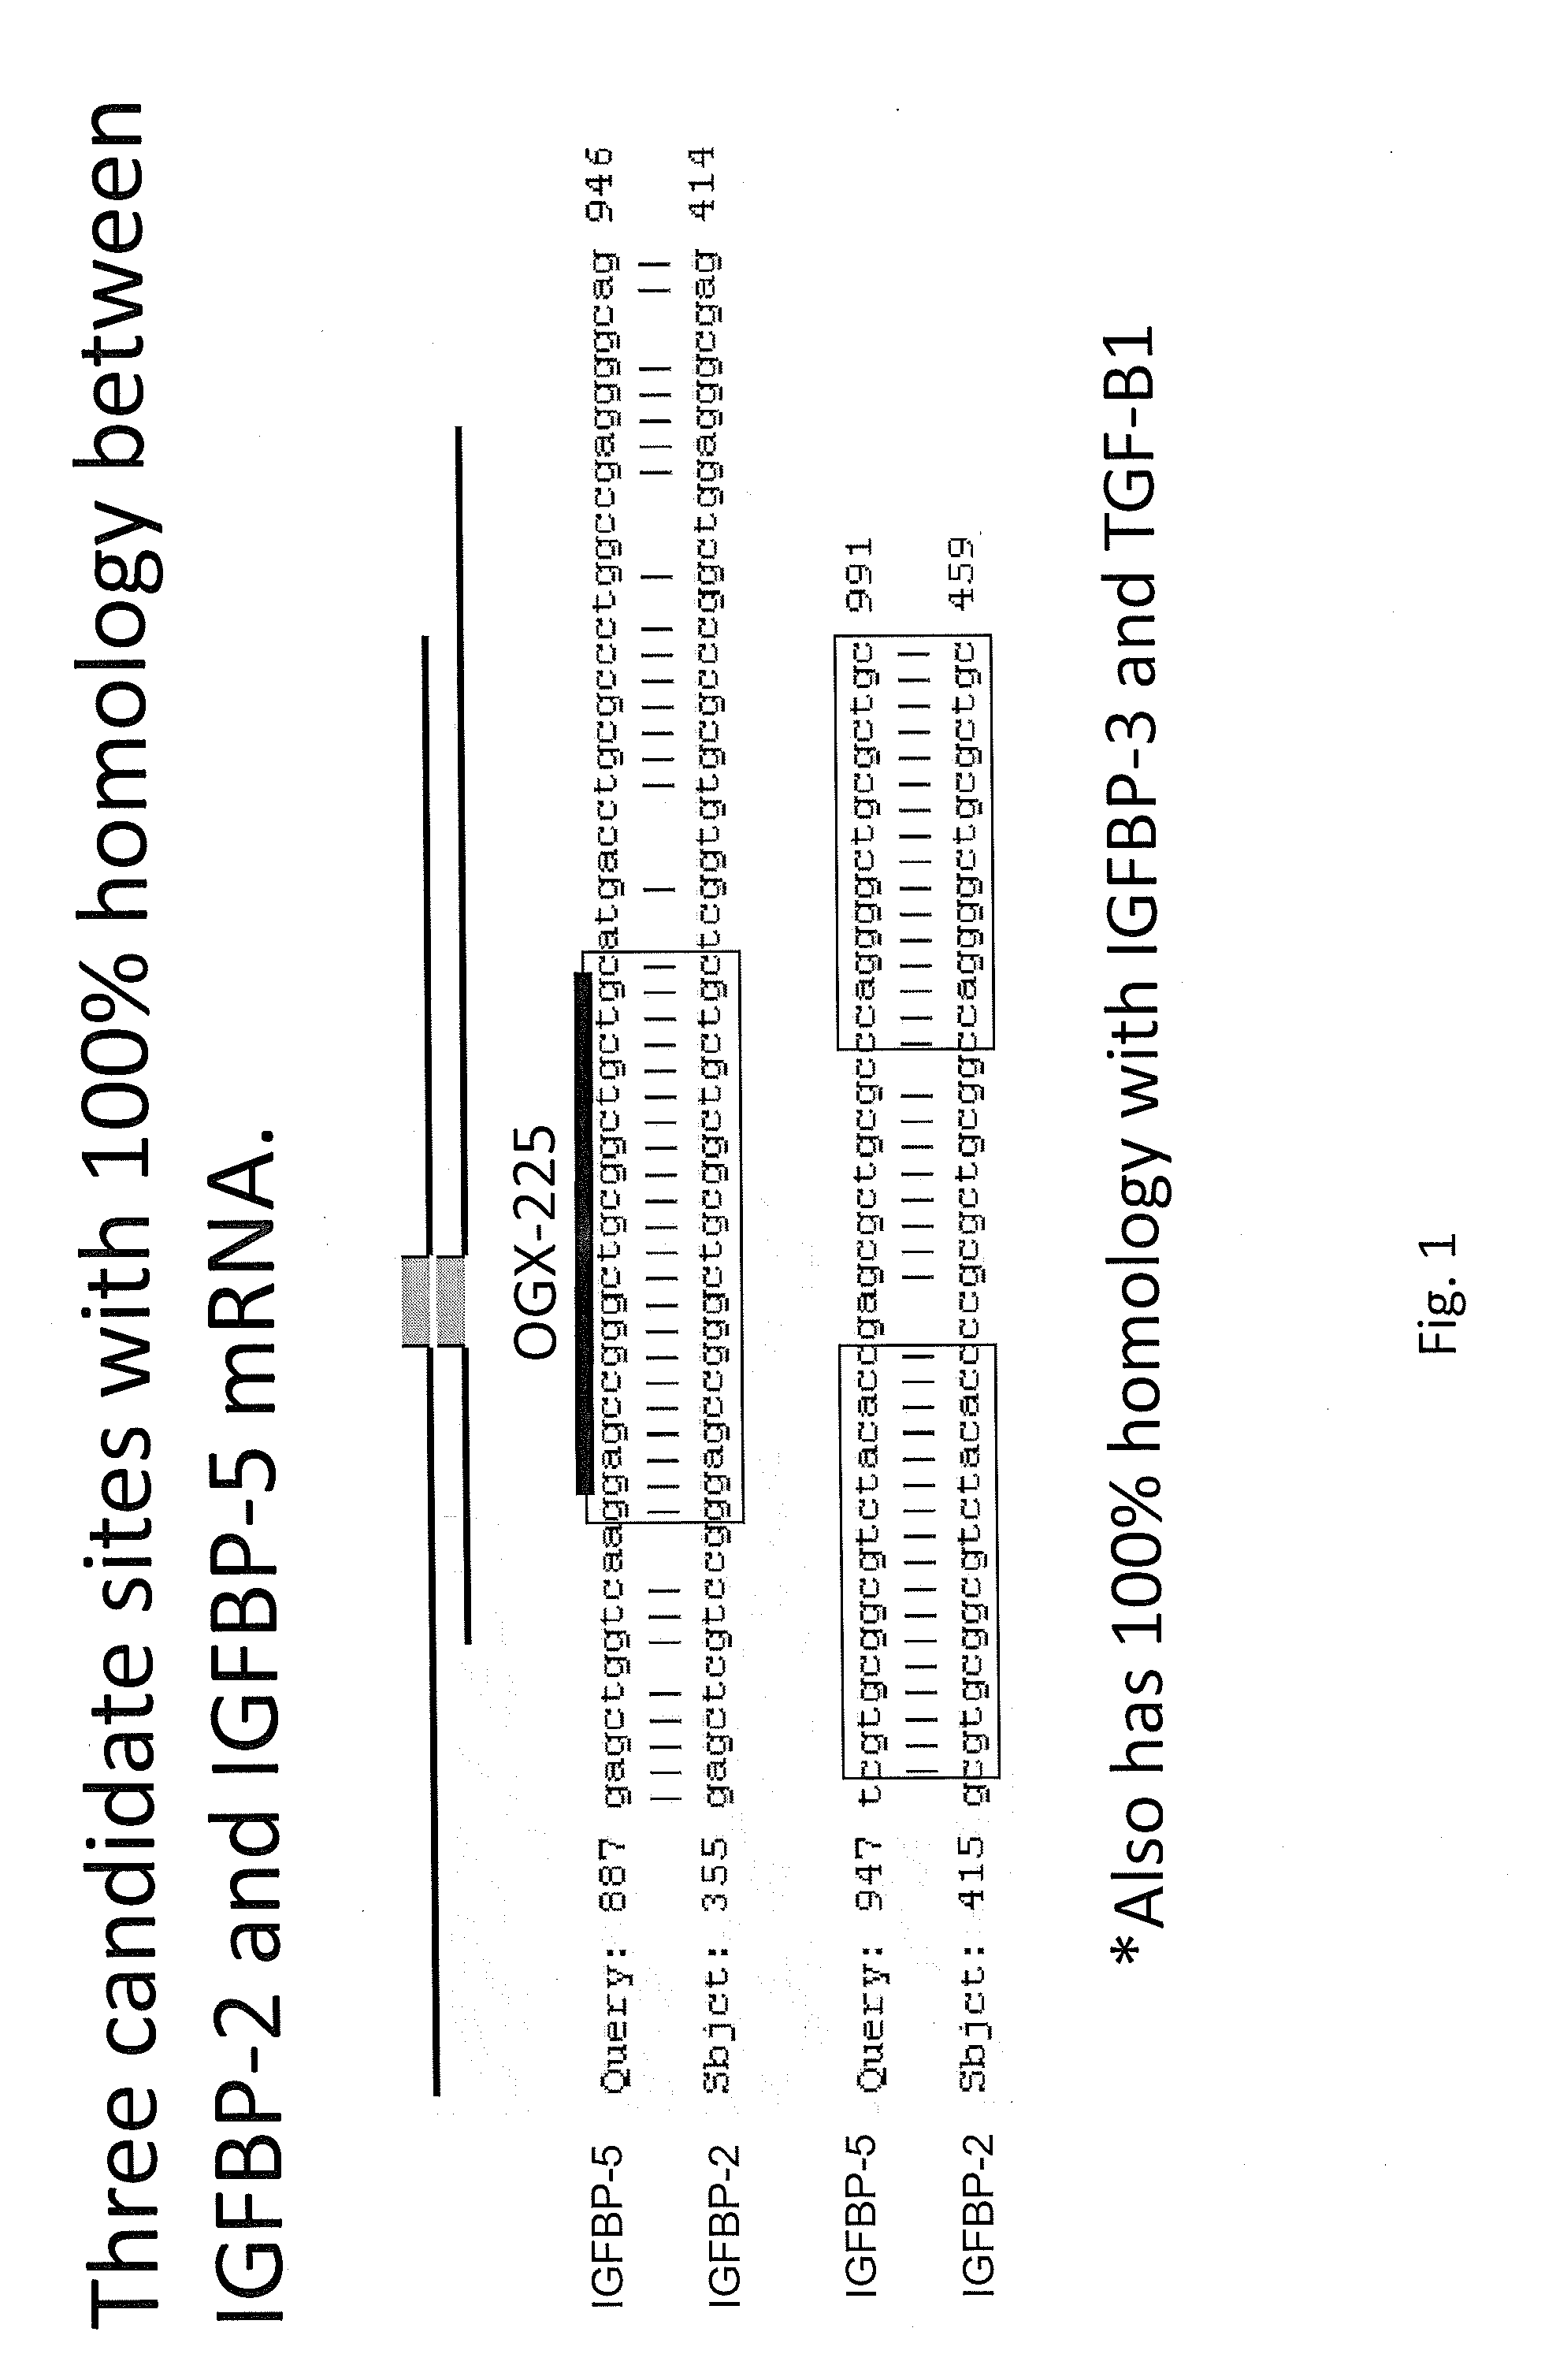 Method for Treatment of Castration-Resistant Prostate Cancer